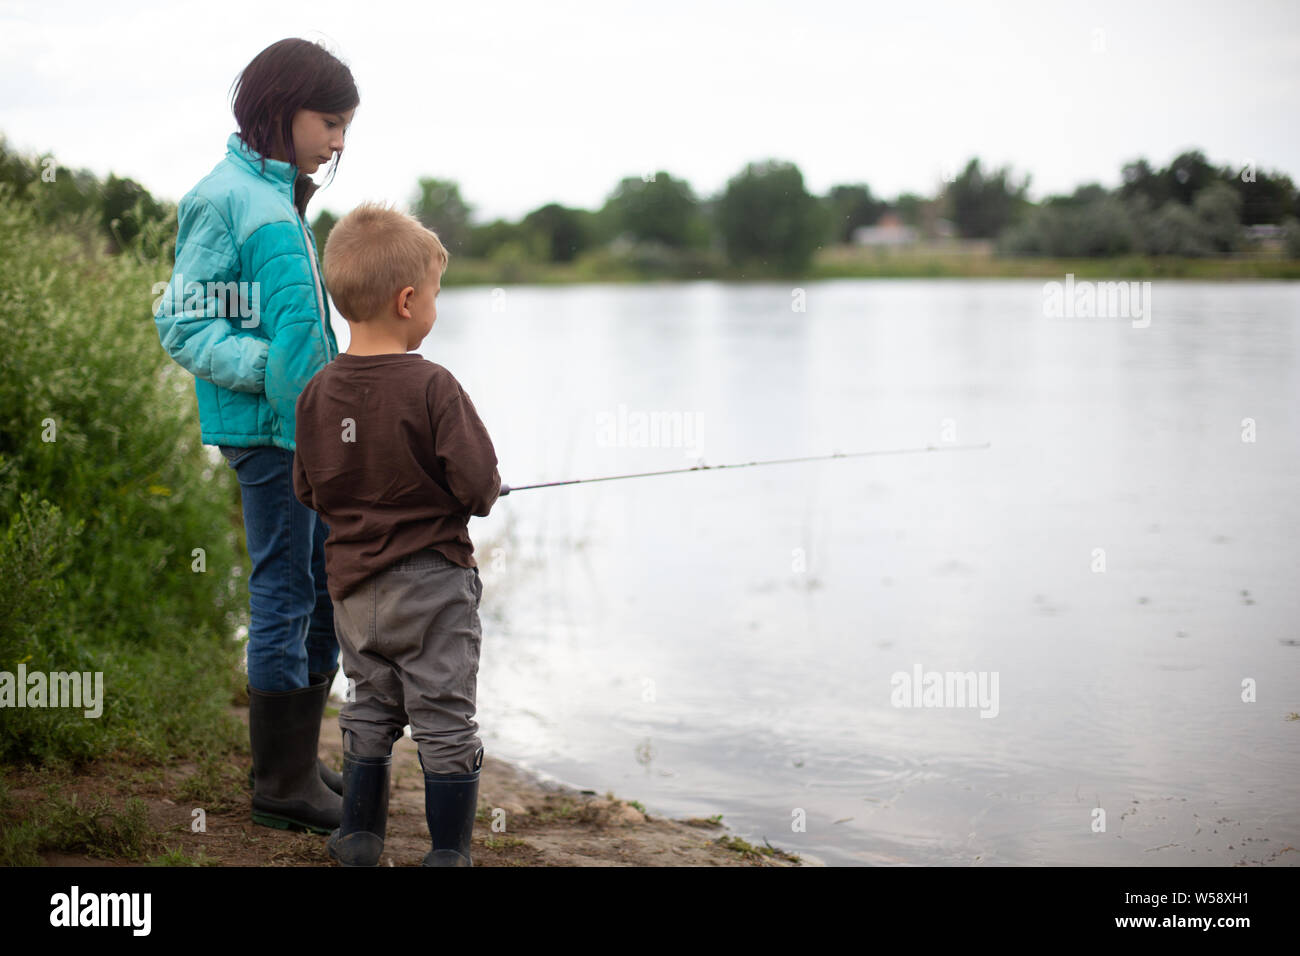 Big sister helping little brother fishing Stock Photo